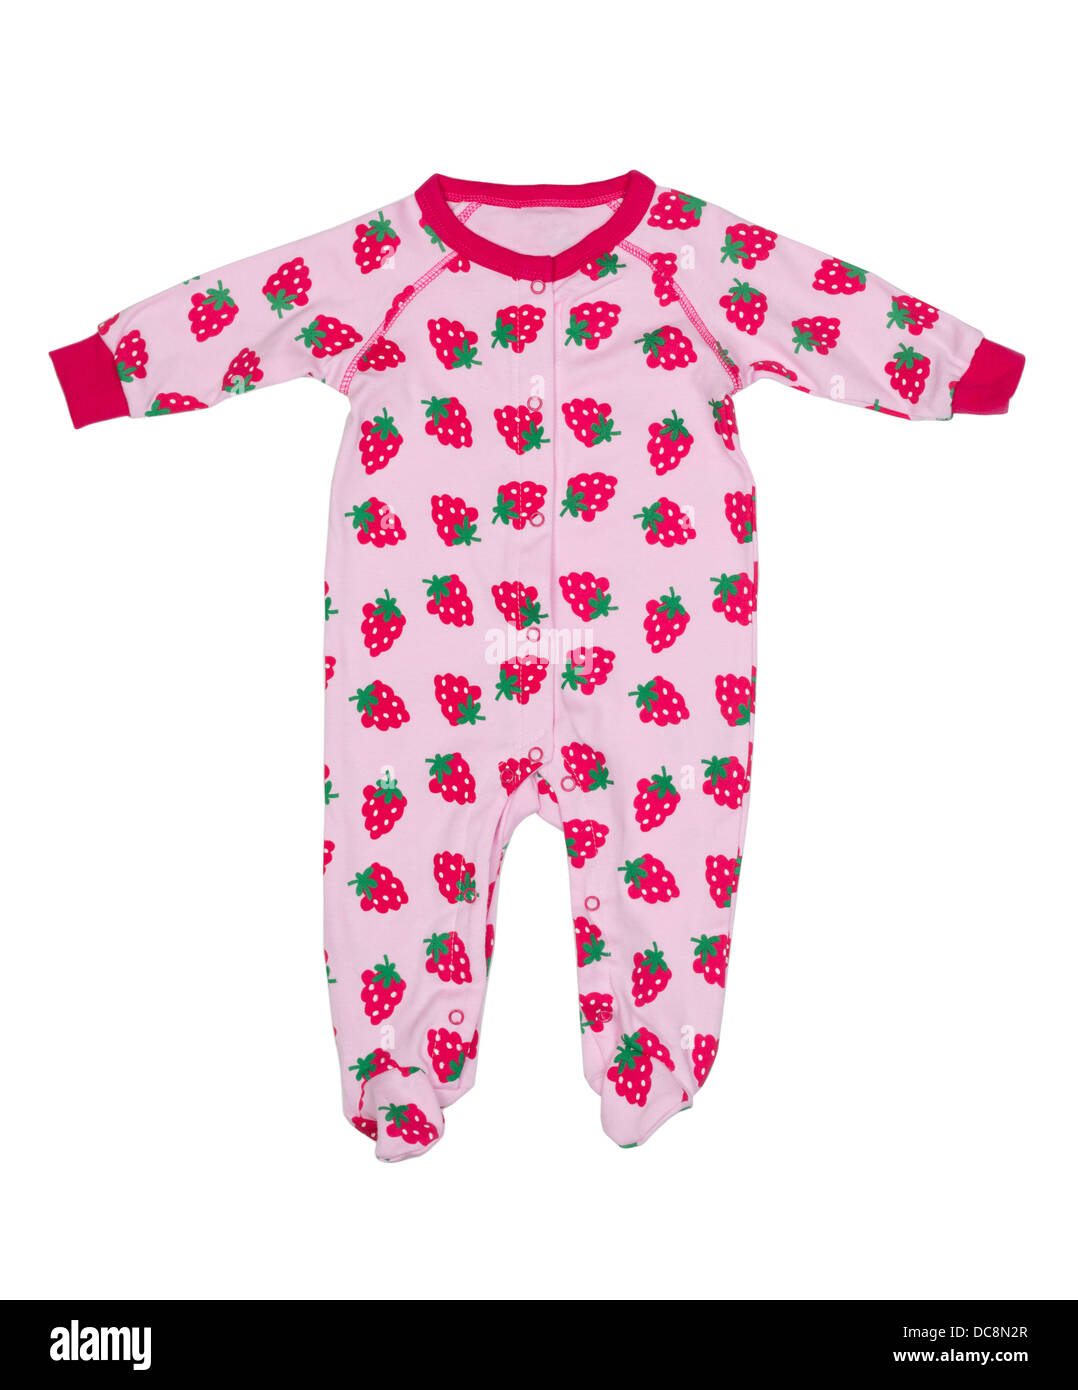 Clothing for newborns with strawberry pattern. Isolate on white. Stock Photo